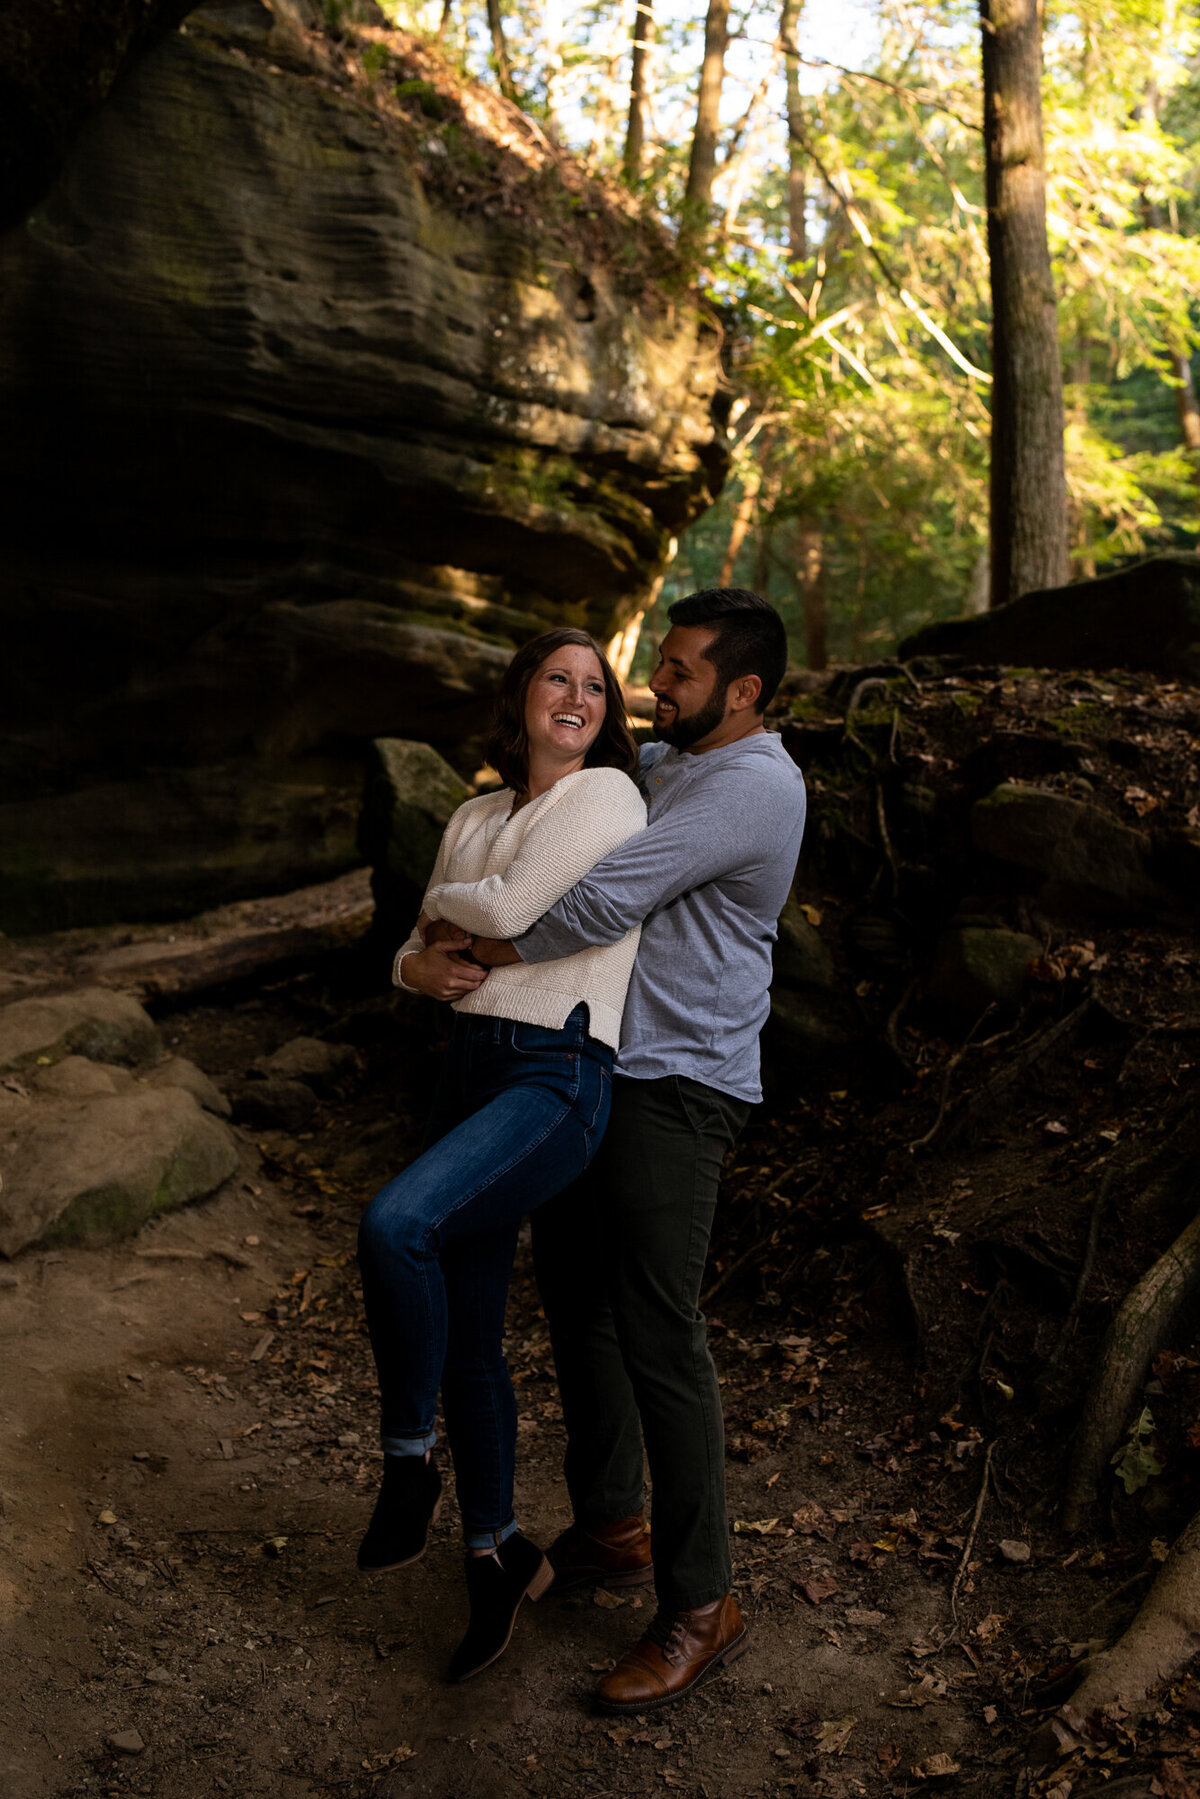 Big hug at engagement session at Hocking Hill's Old Man's Cave